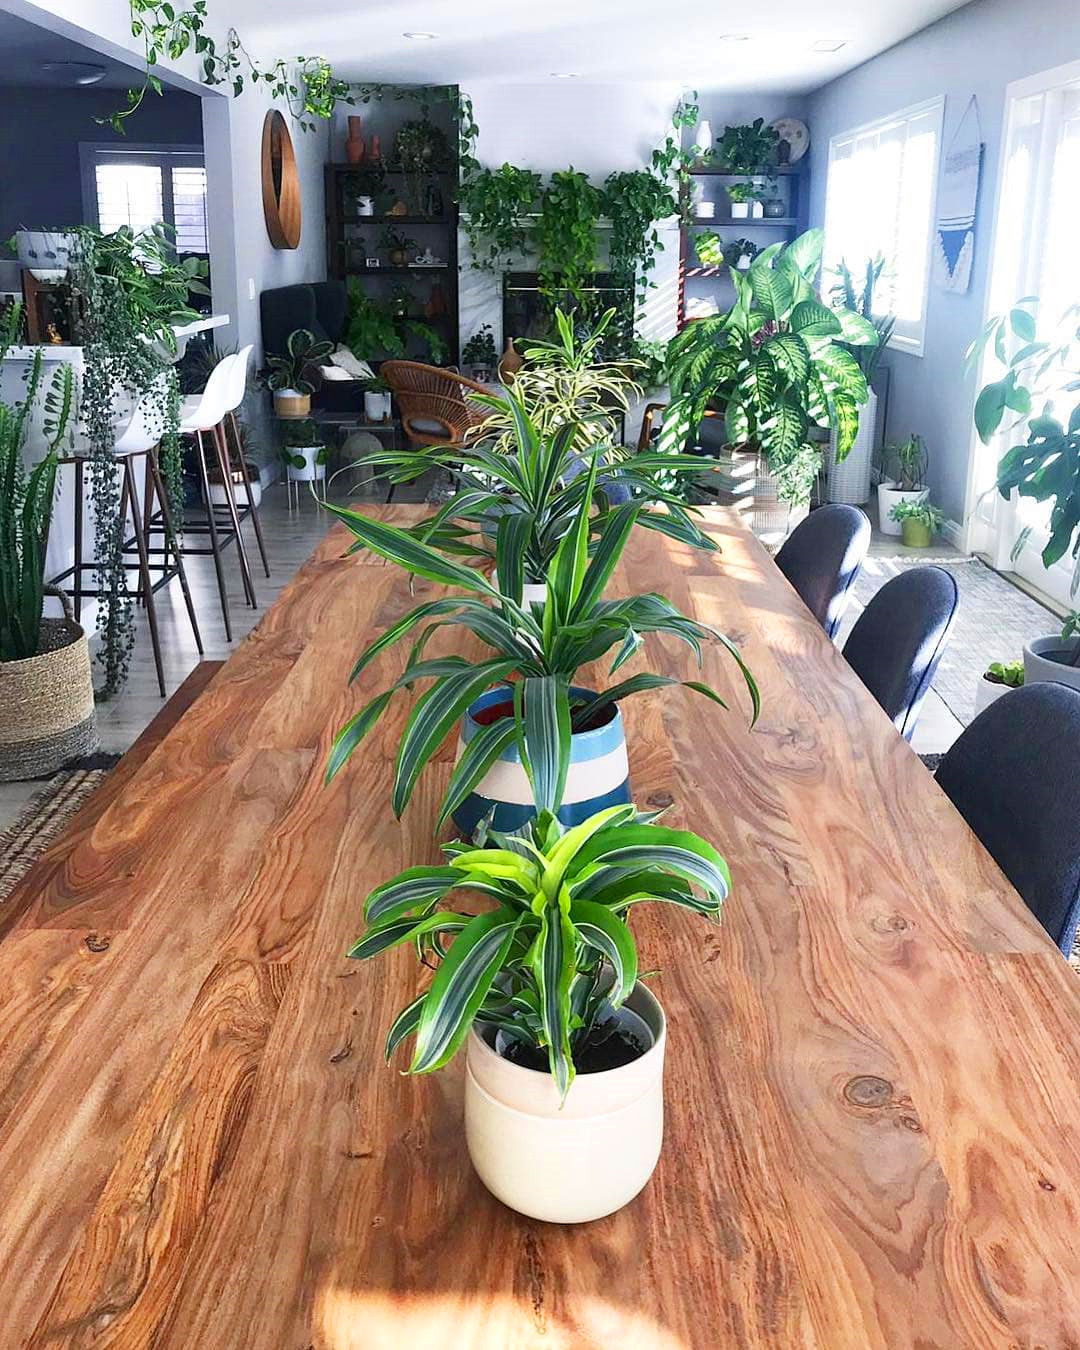 65+ Indoor Garden Ideas You Will Fall For